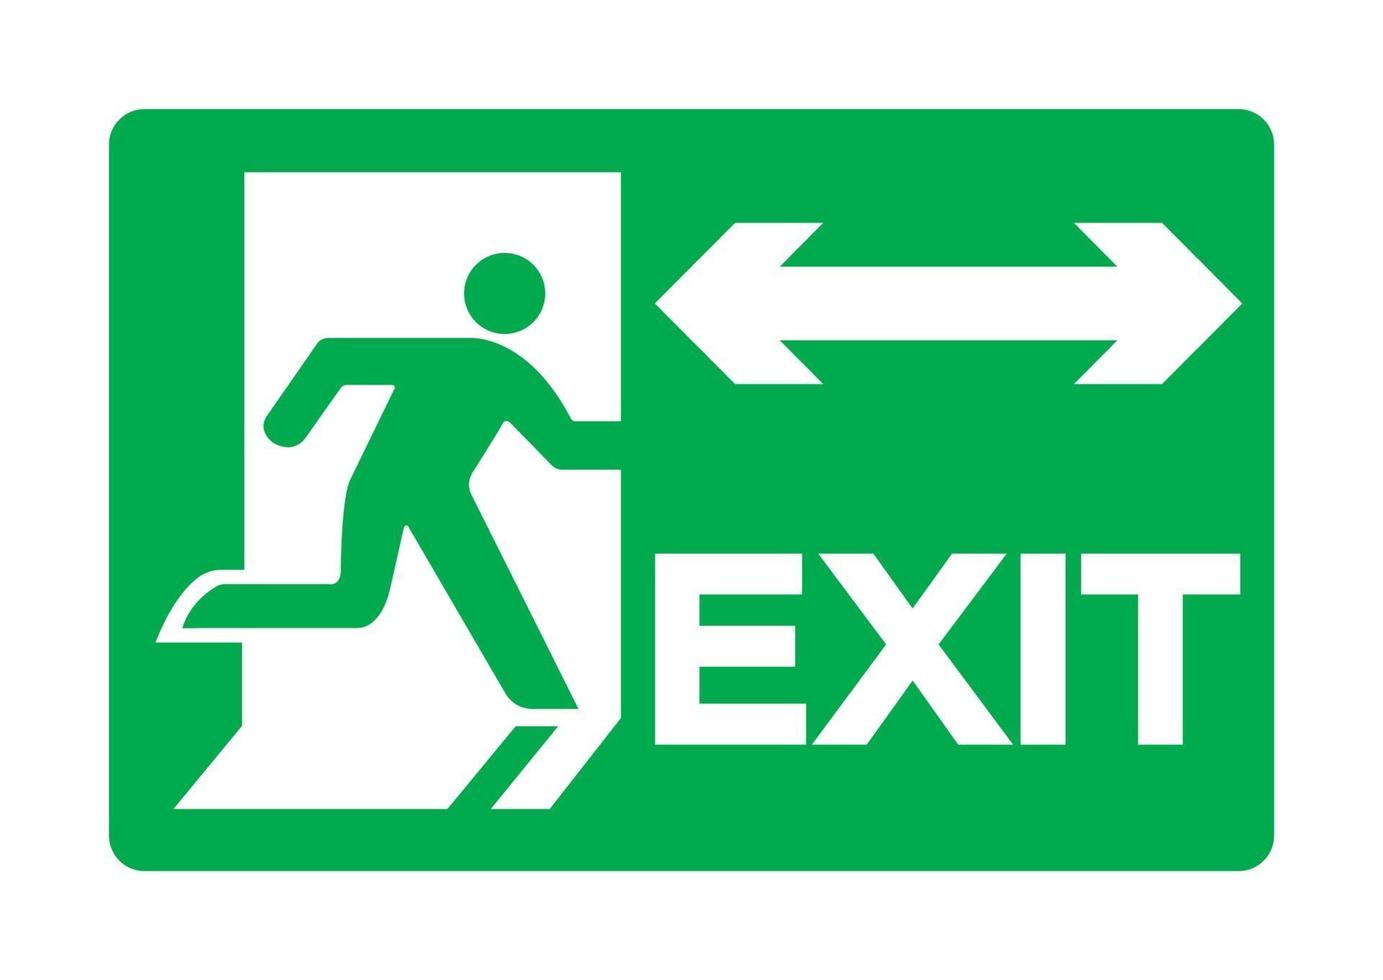 Exit Green Sign Isolate On White Background,Vector Illustration EPS.10 vector